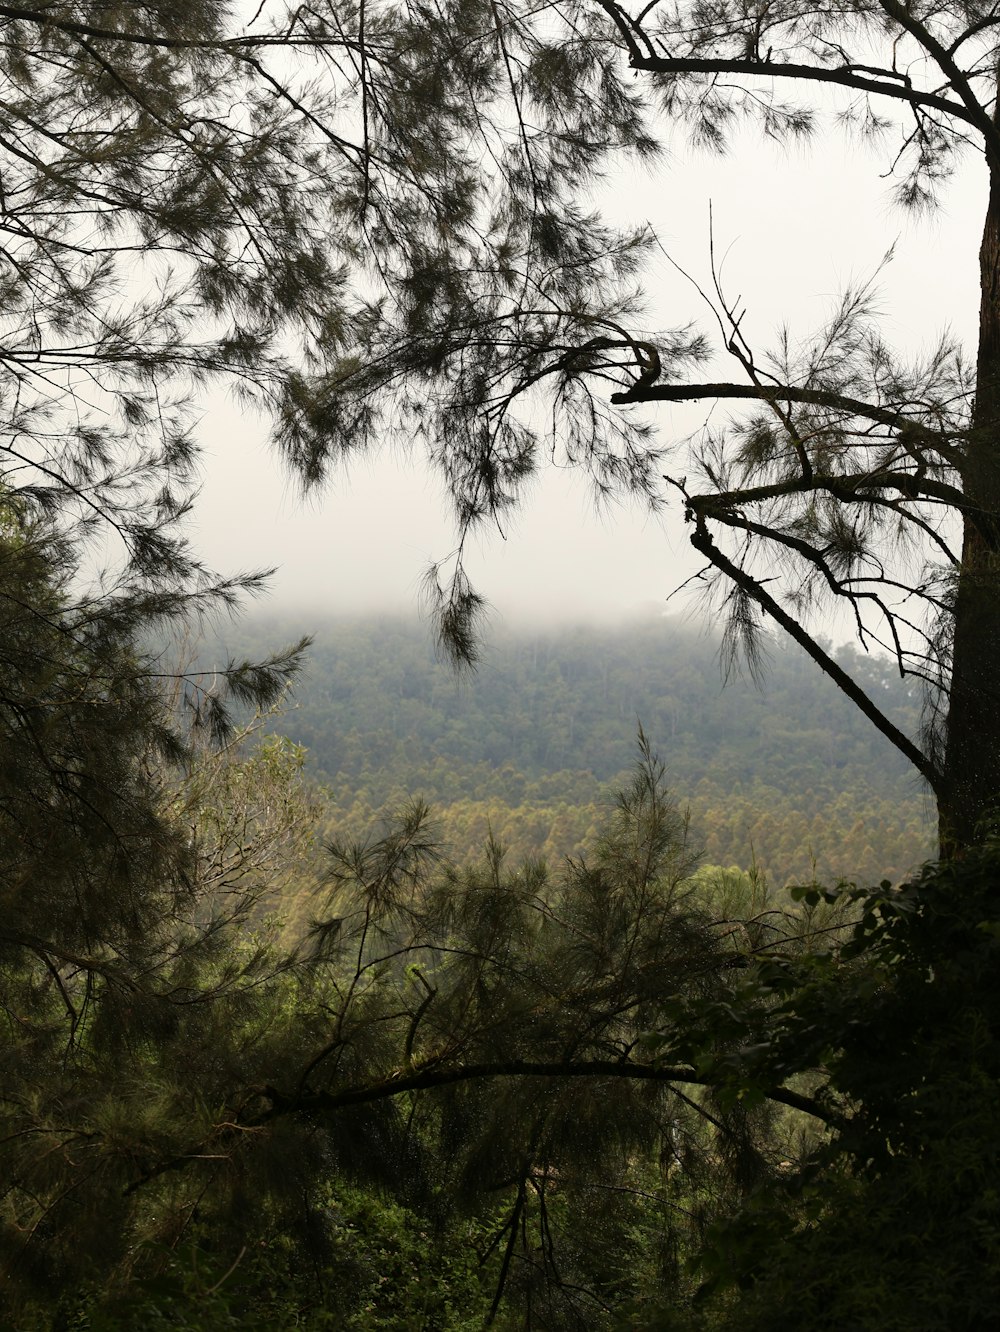 a view of a forest from a distance